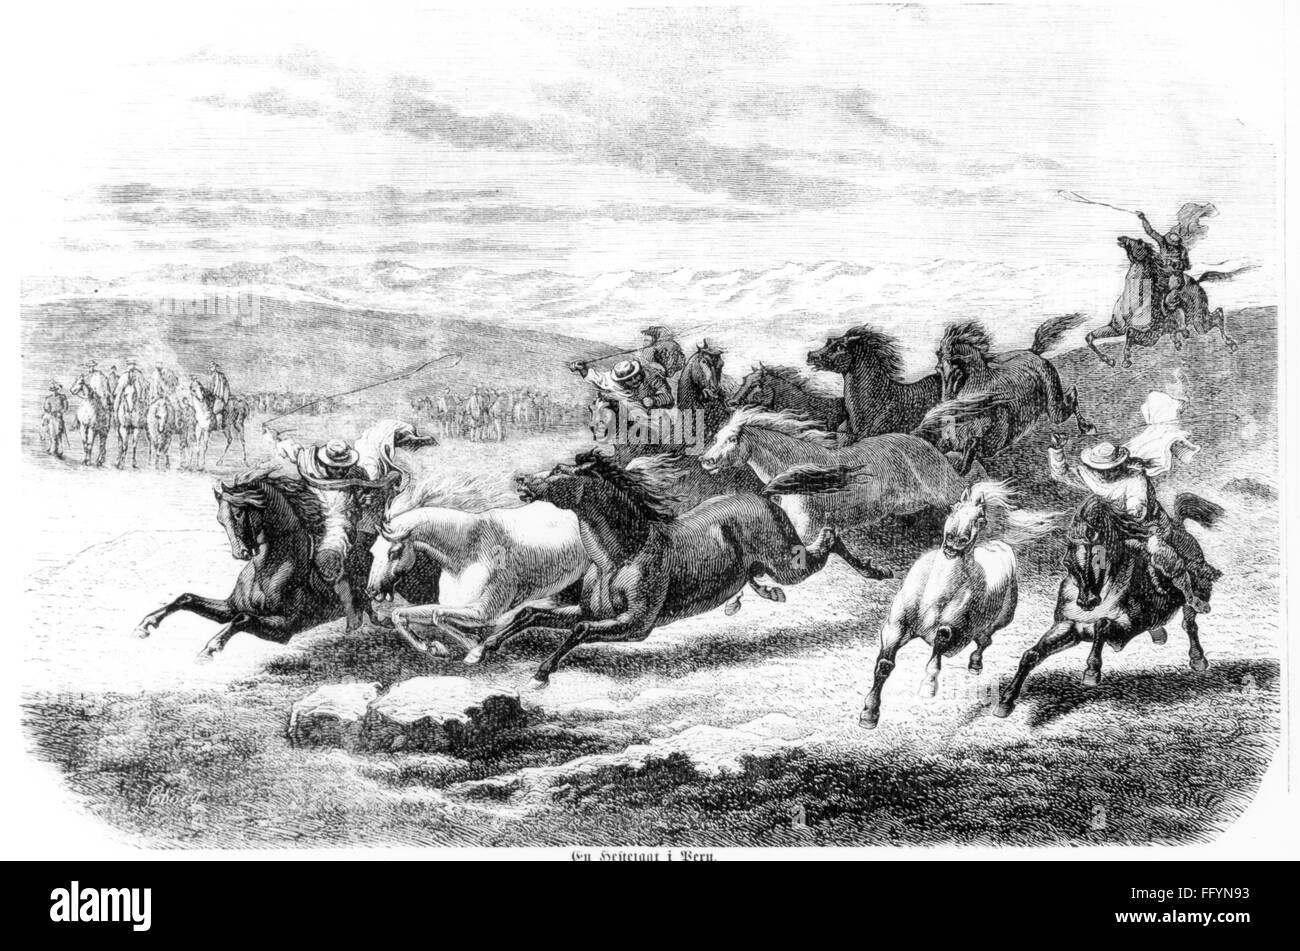 hunting, wild horses, hunt for wild horses in Peru, wood engraving, circa 1870, Additional-Rights-Clearences-Not Available Stock Photo